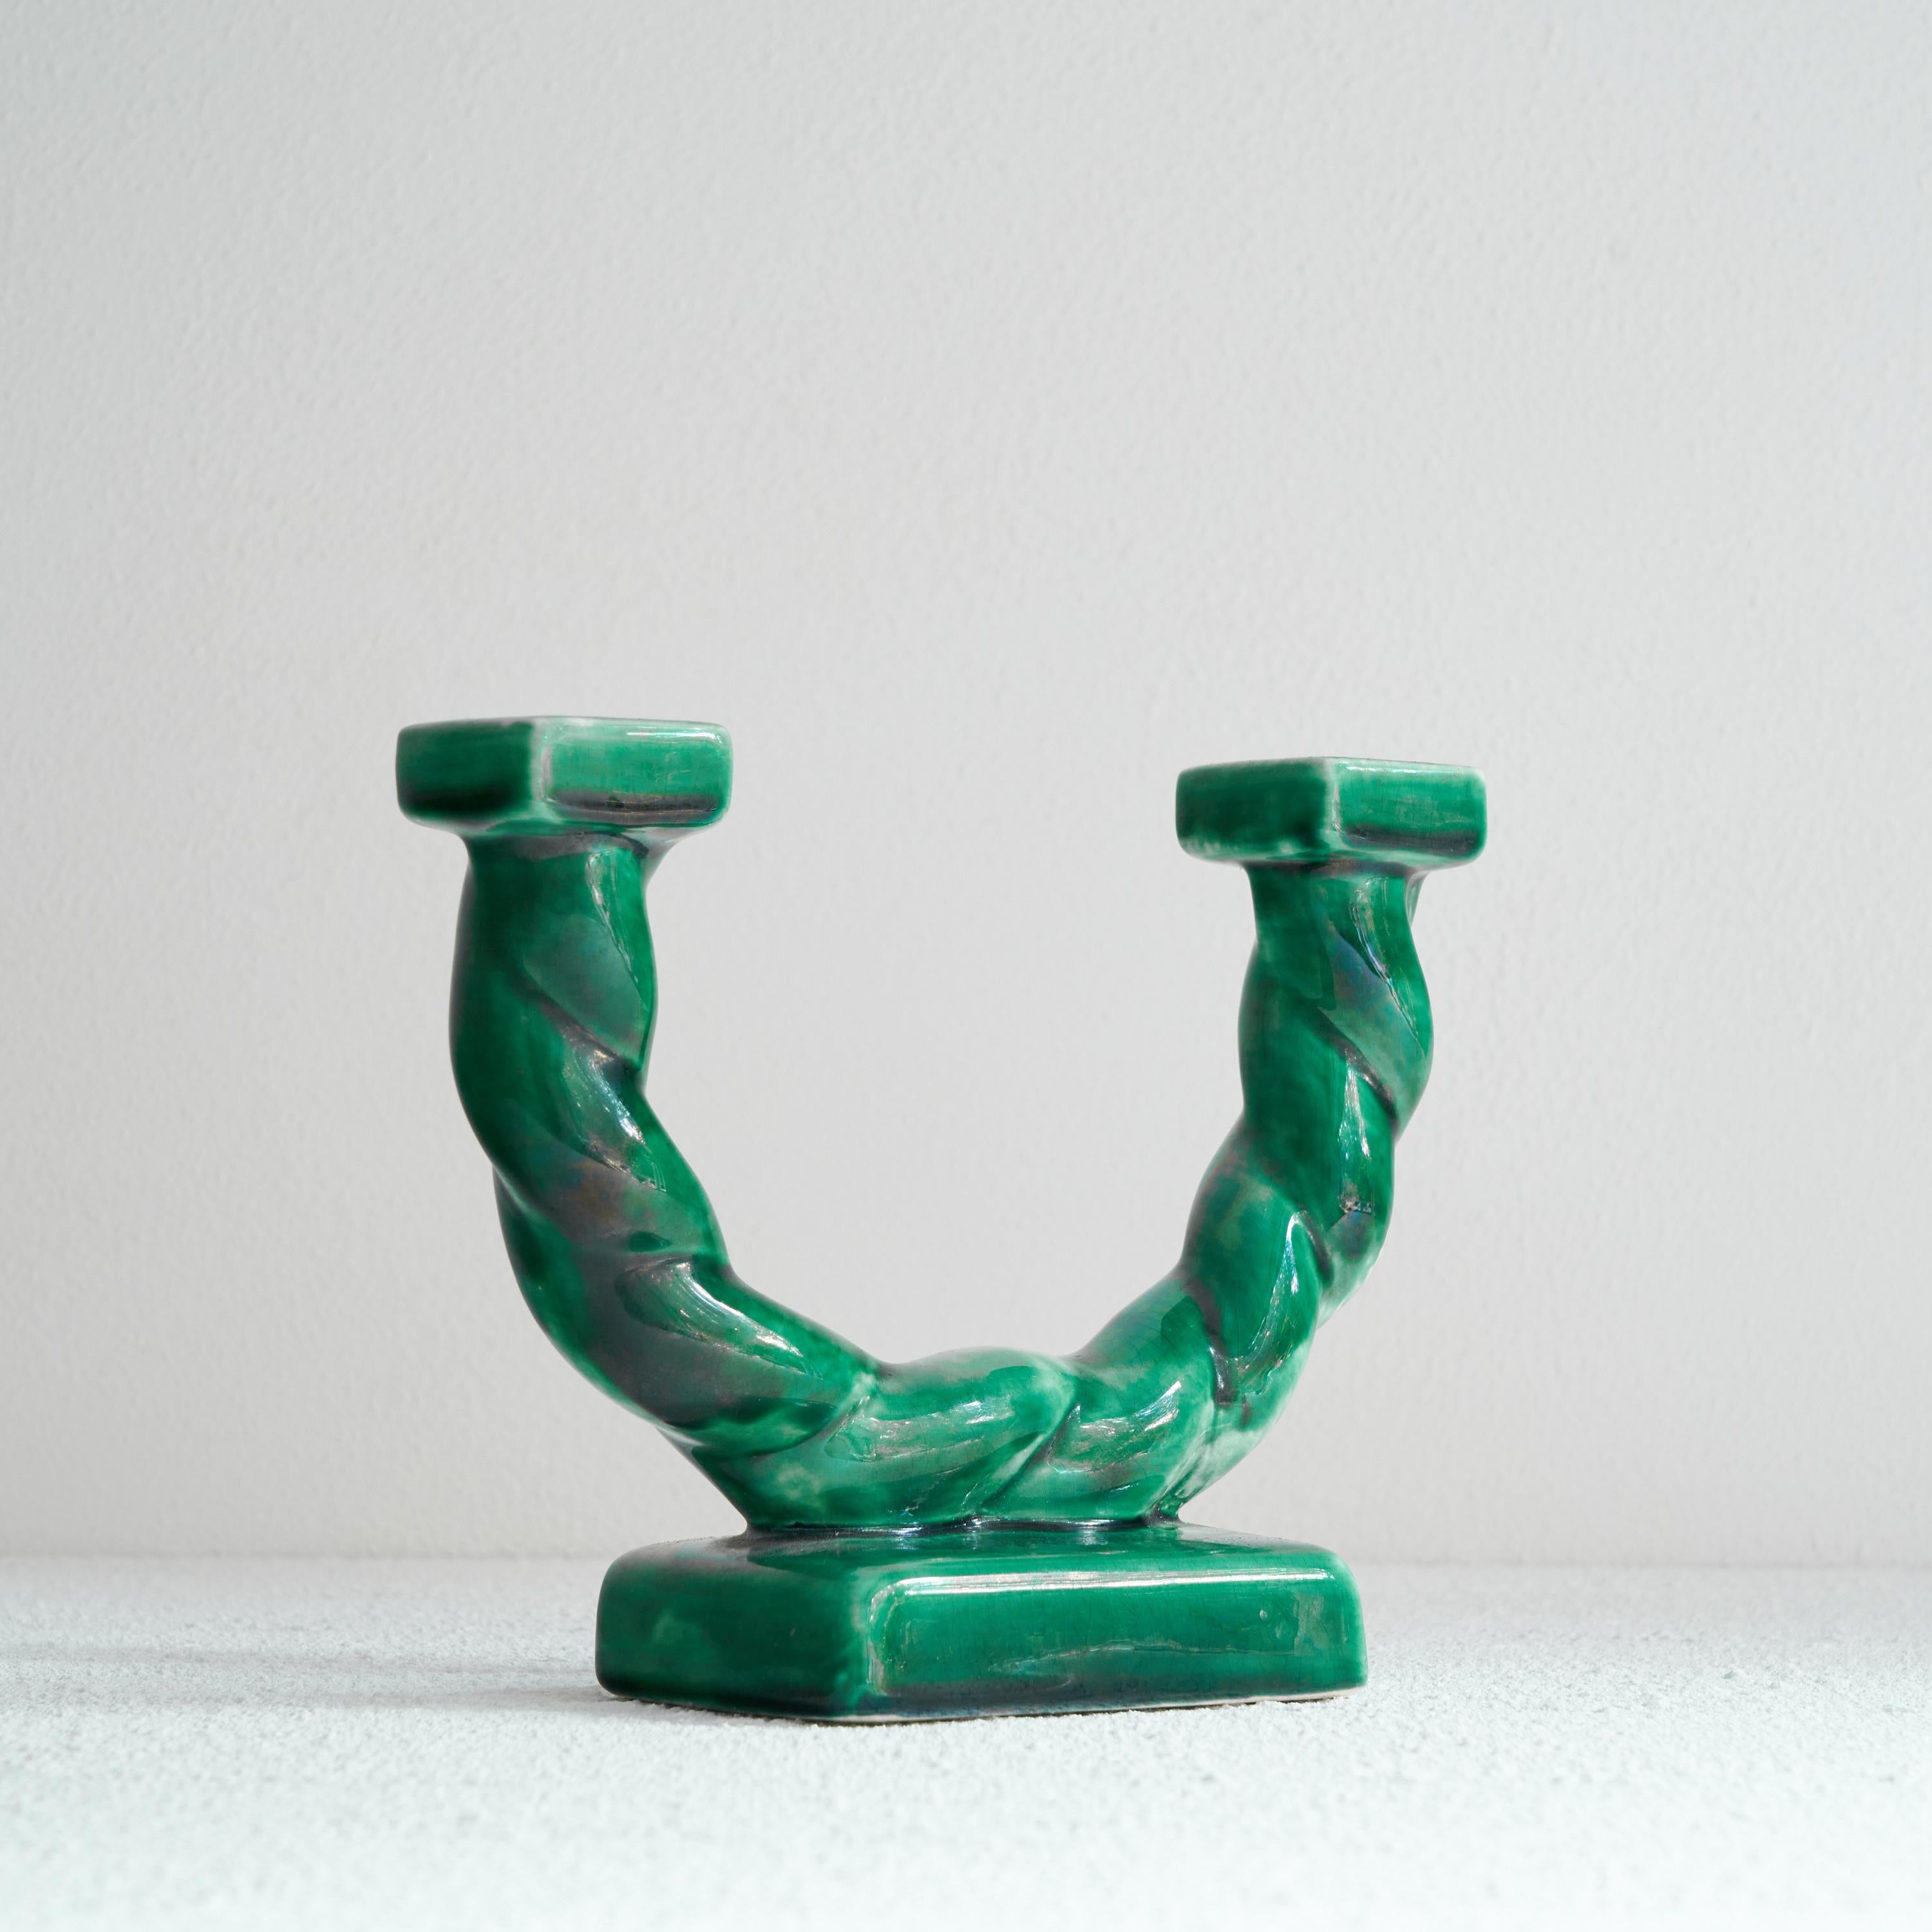 Elegant Green French Candle Holder, Longchamp, 1950s, France.

This green candle holder - or lamp base - by Longchamp France is a very stylish and decorative piece. Rich in style and color, this is a very distinct piece which will attract attention